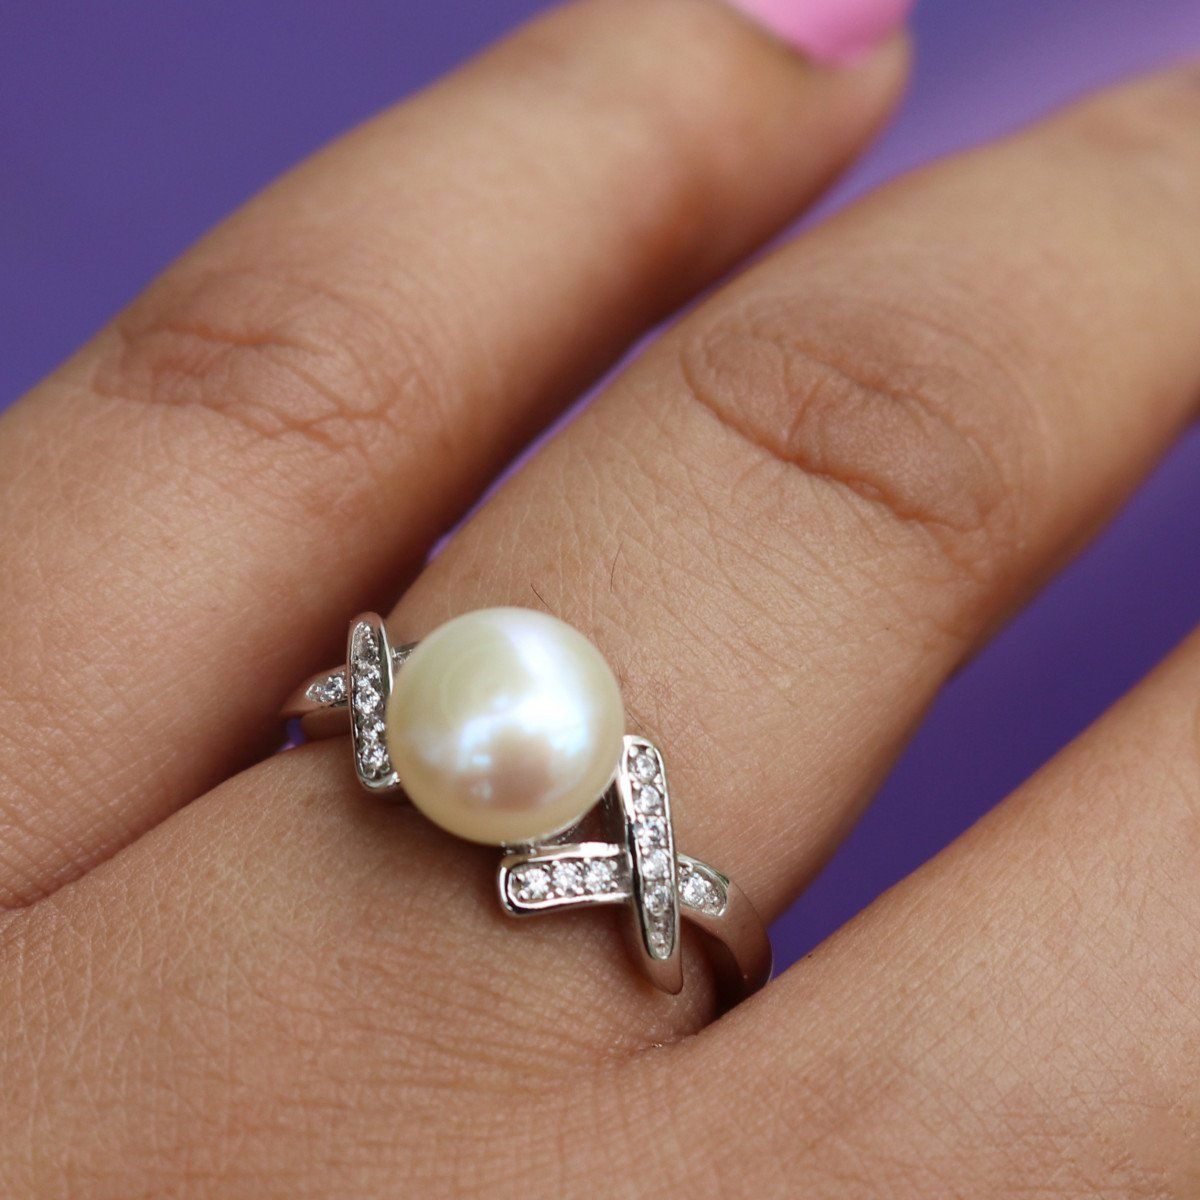 Buy Natural Pearl Ring for Woman, Freshwater Swirl Wave Pearl With Sterling  Silver, Dainty Ring for Mother, Wife, Girlfriend or Daughter Online in  India - Etsy